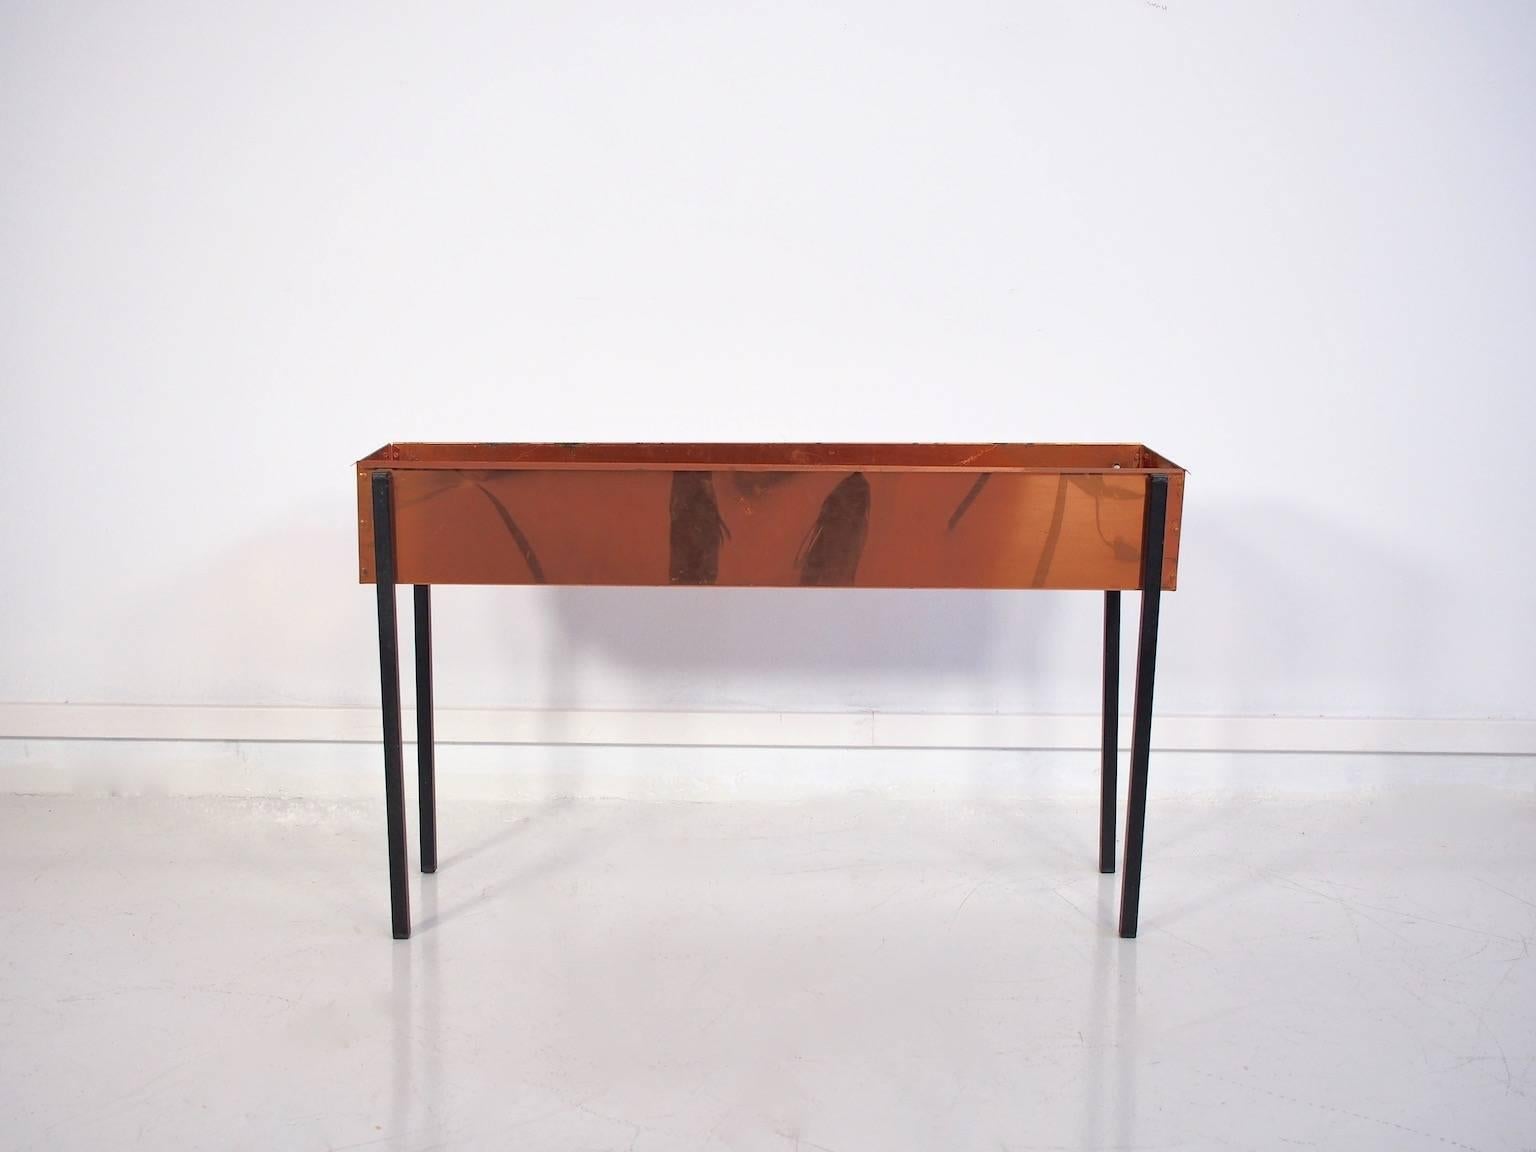 A Mid-Century flower table, Jardinière by a Scandinavian maker. Copper sides with metal legs in black.